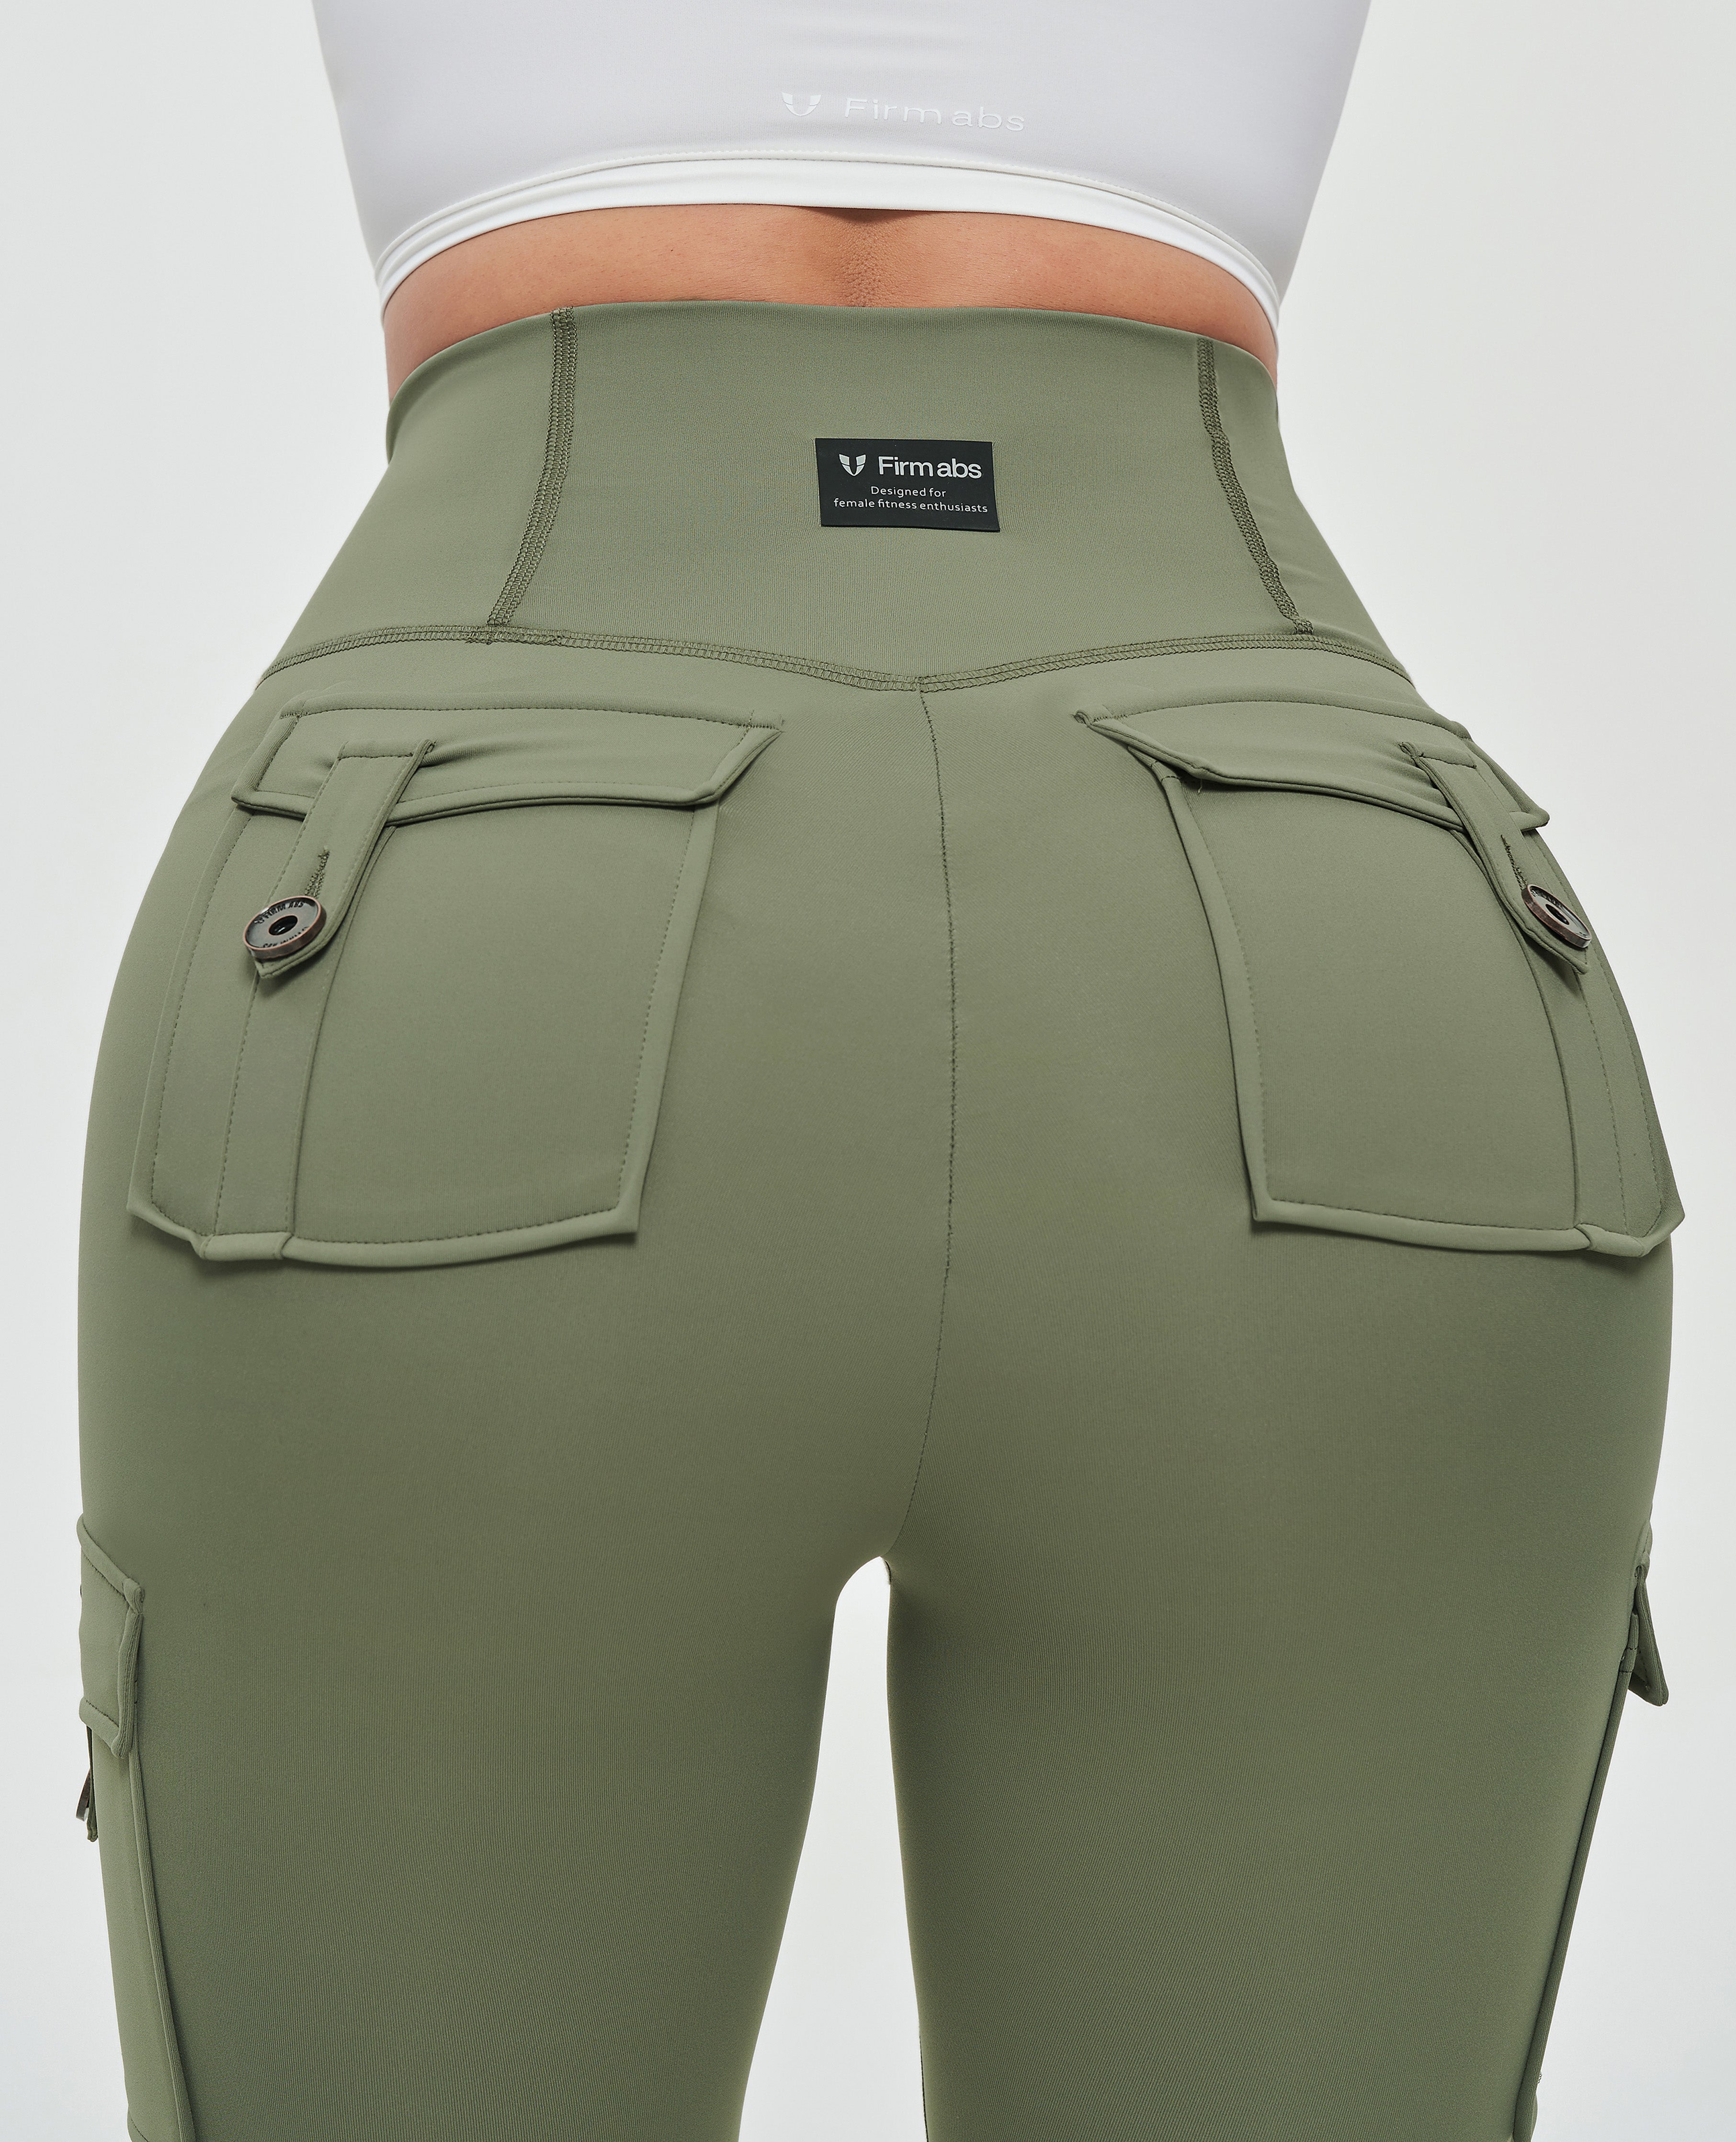 Epiphany Moment Sage Pants | Olive pants outfit, Outfits, Cute casual  outfits